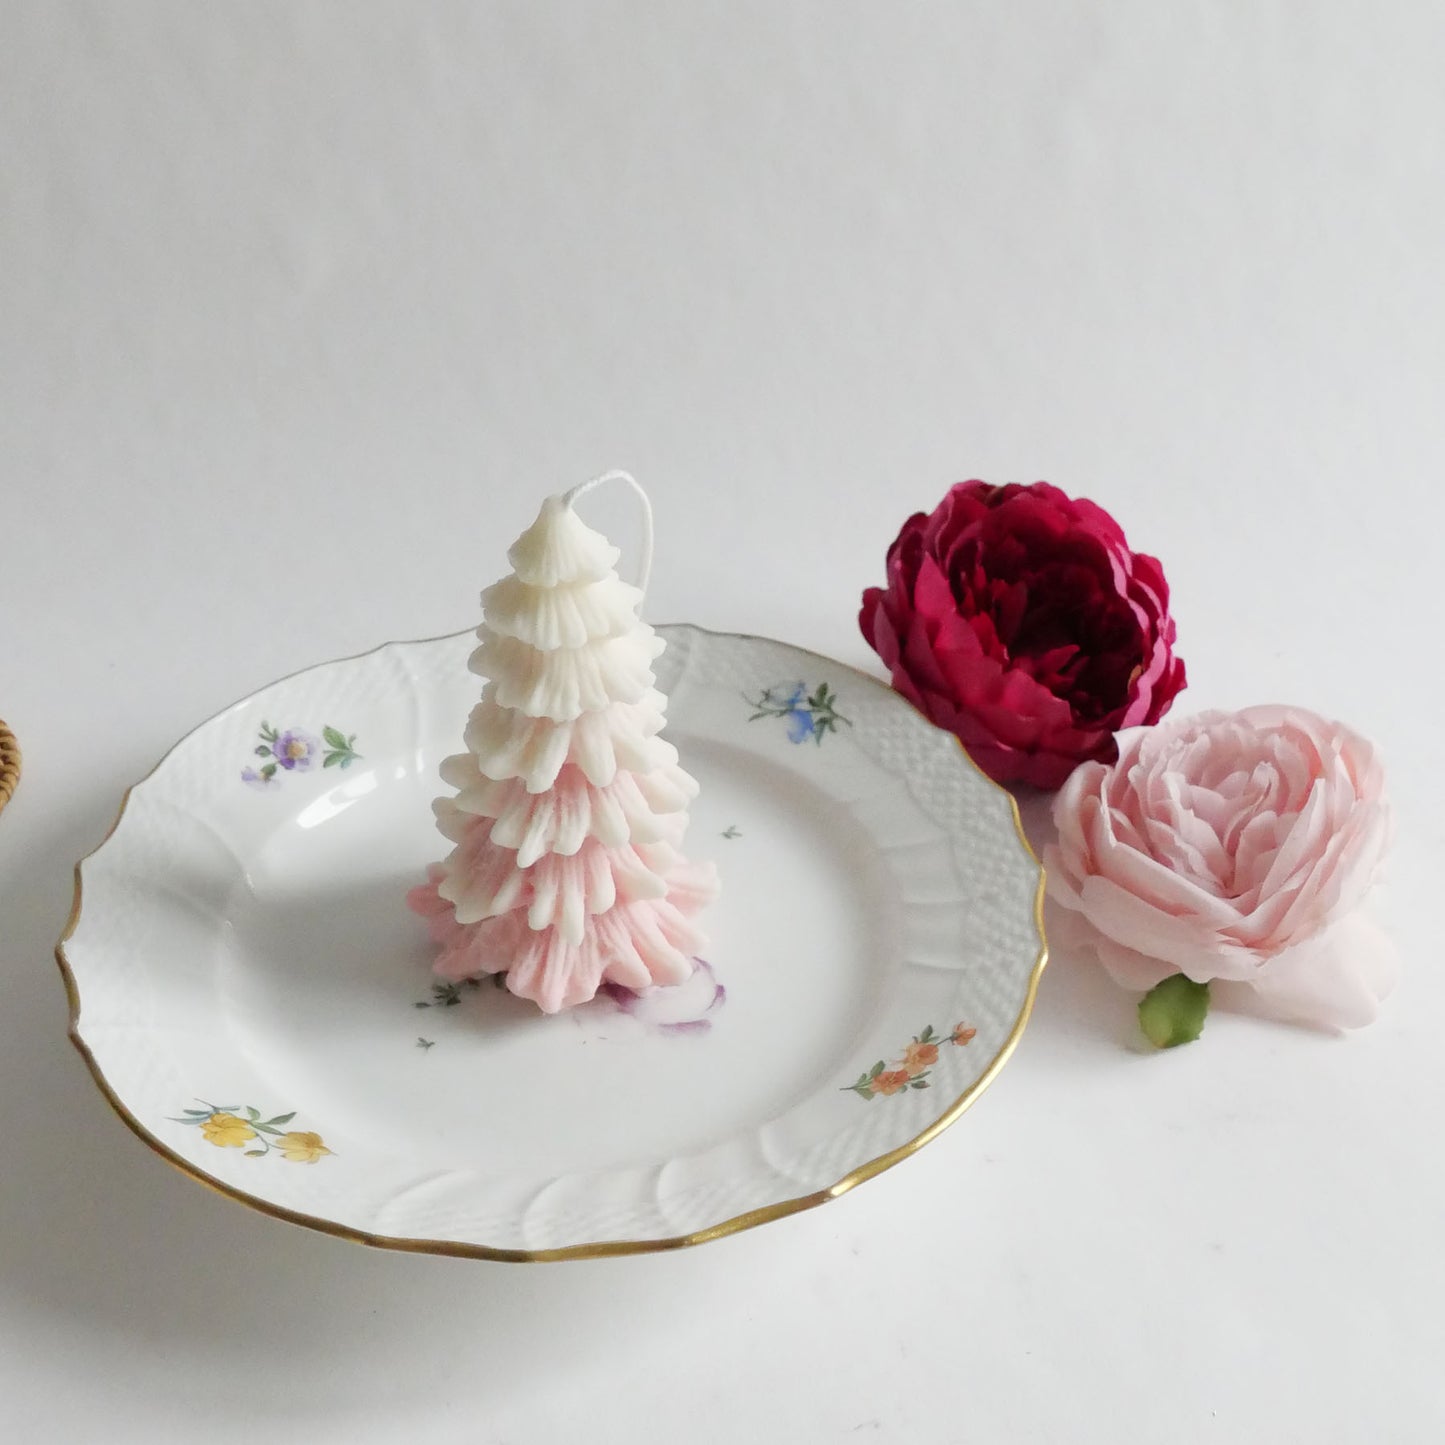 Scented Christmas candle White & baby pink _Afternoon Tea